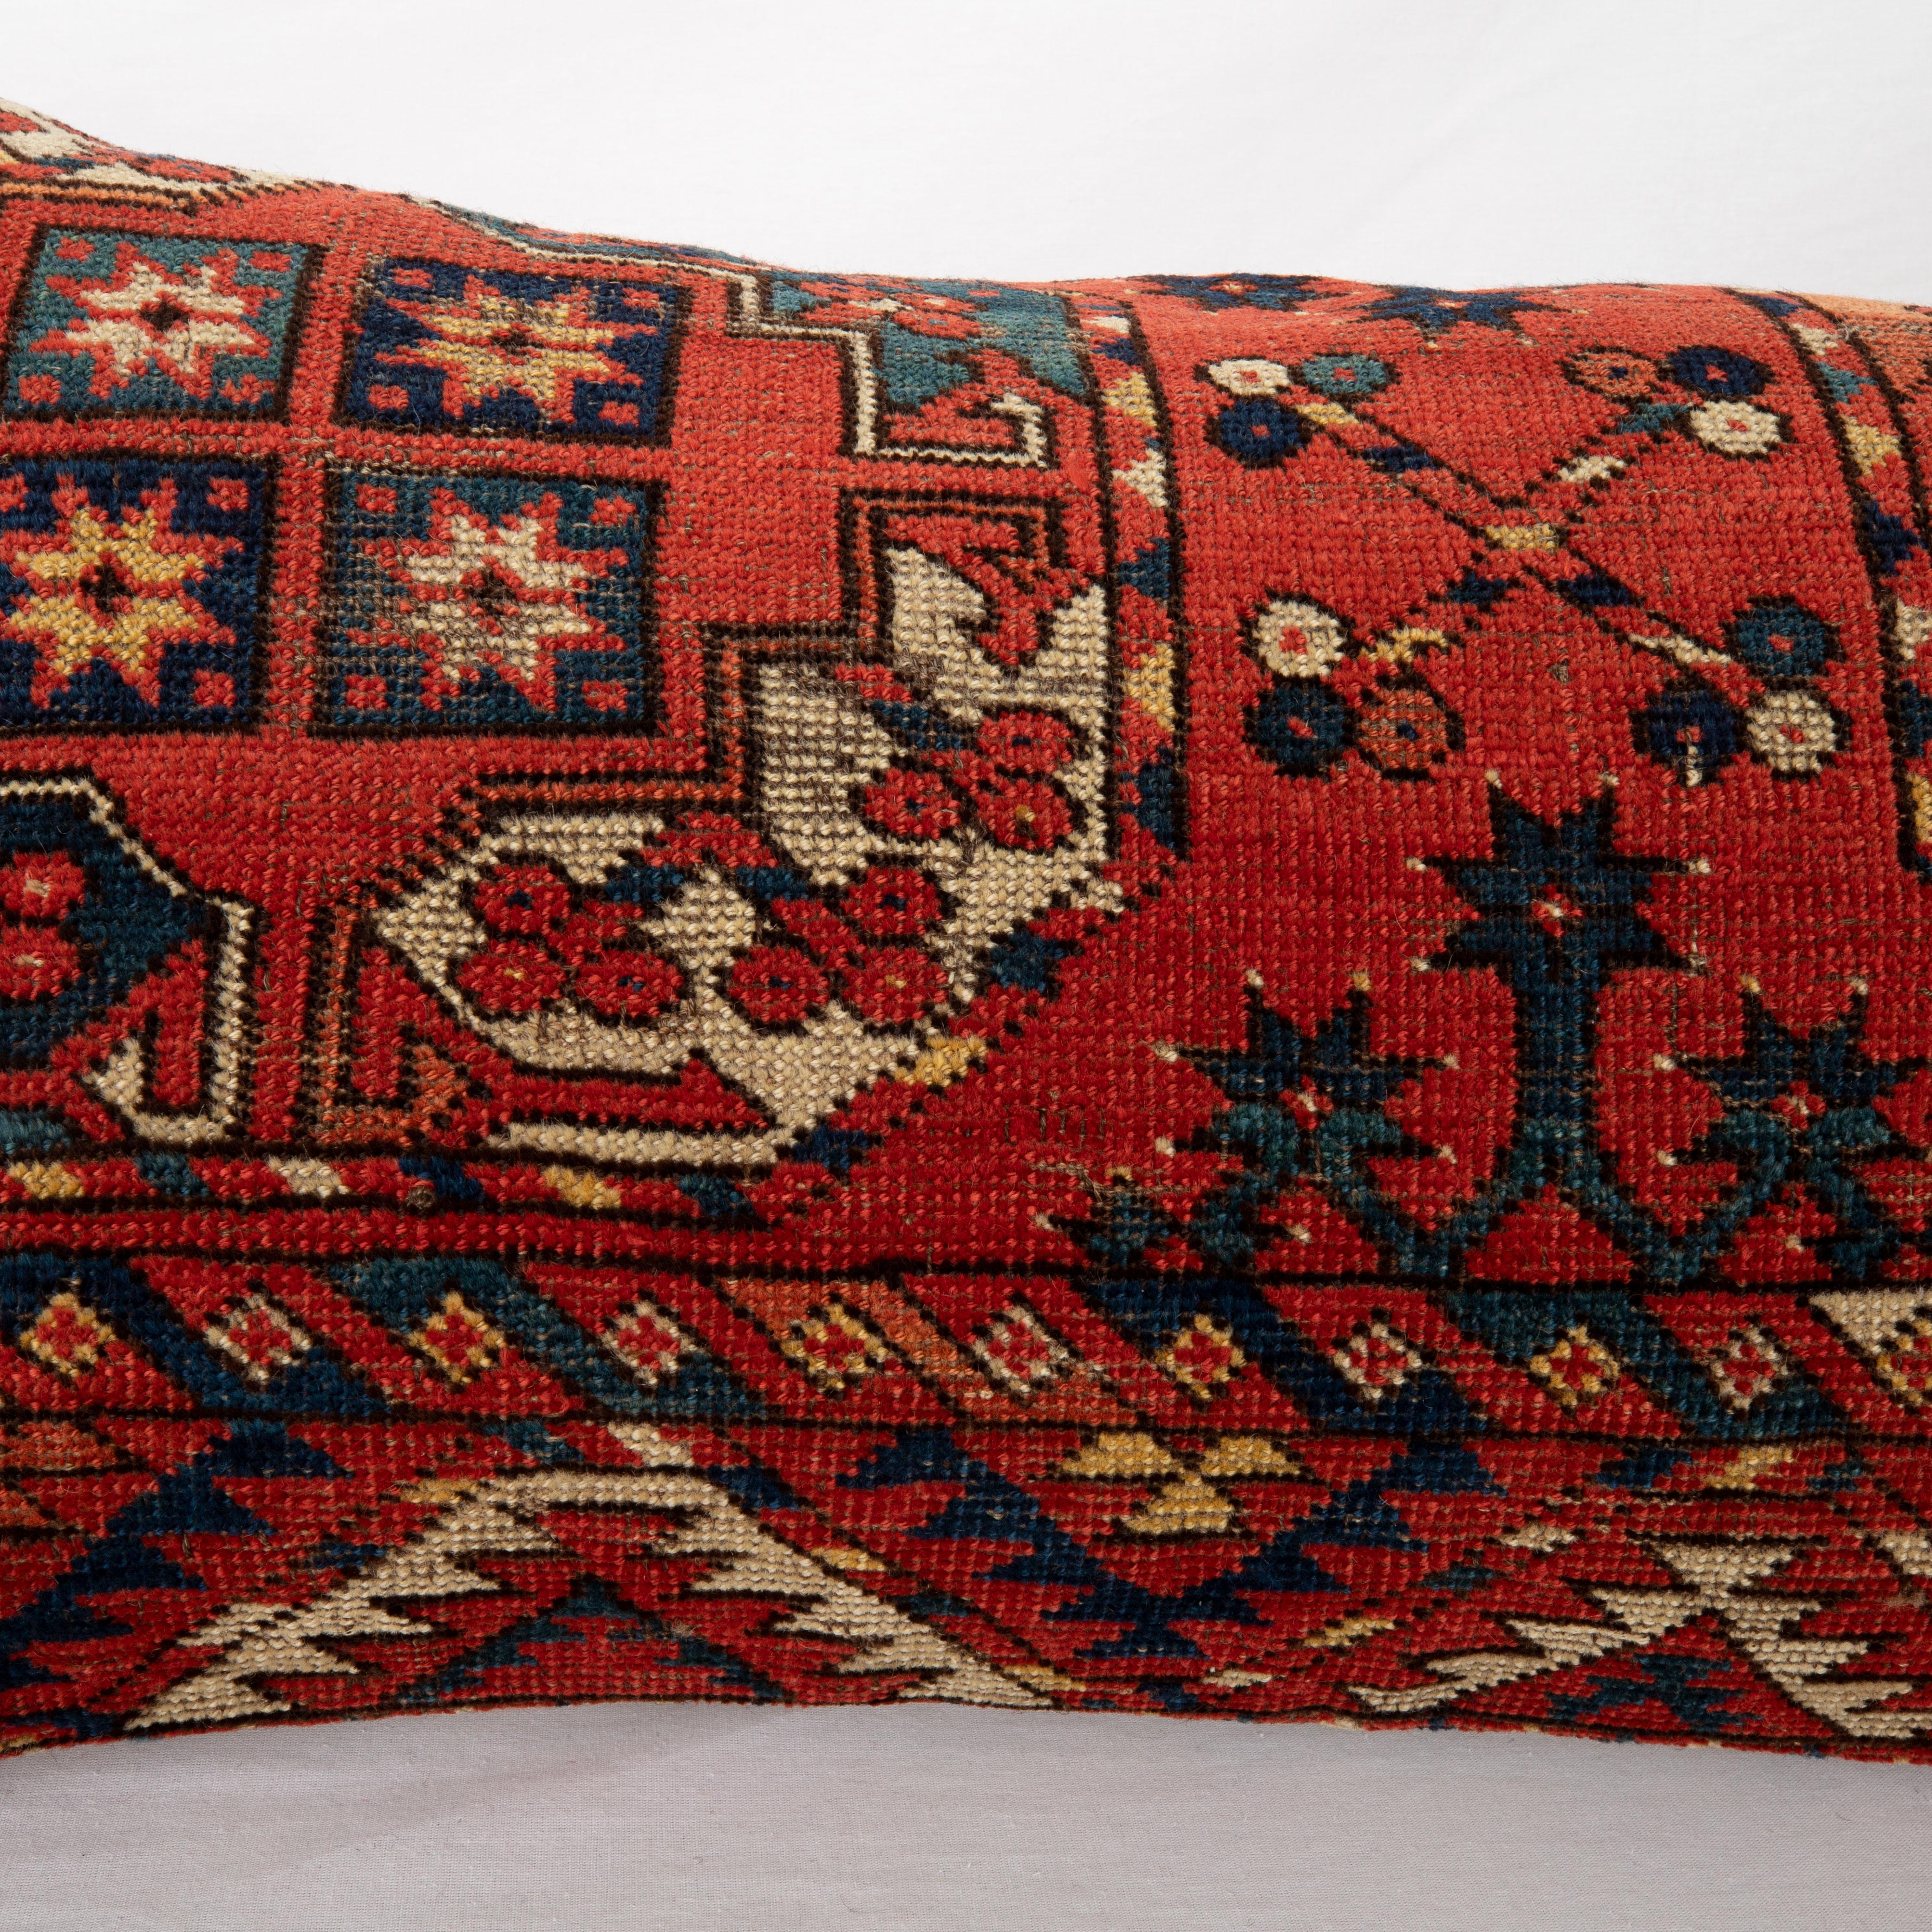 Wool Antique Rug Pillowcase Made from a Mid-19th C. Turkmen Ersari Rug Fragment For Sale